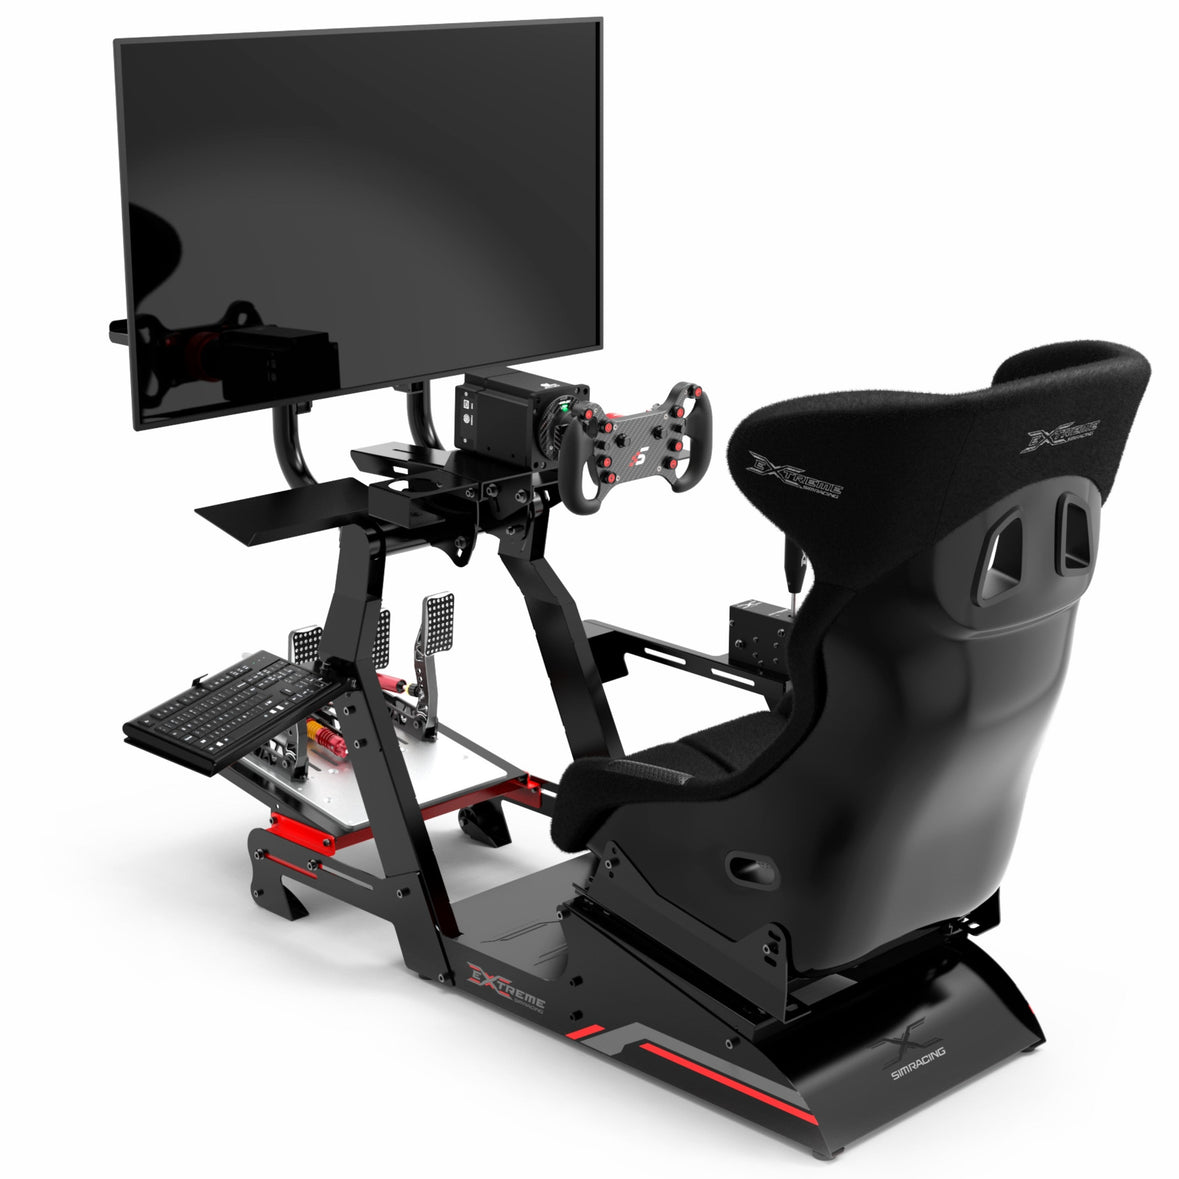 Racing Cockpit Great Offers